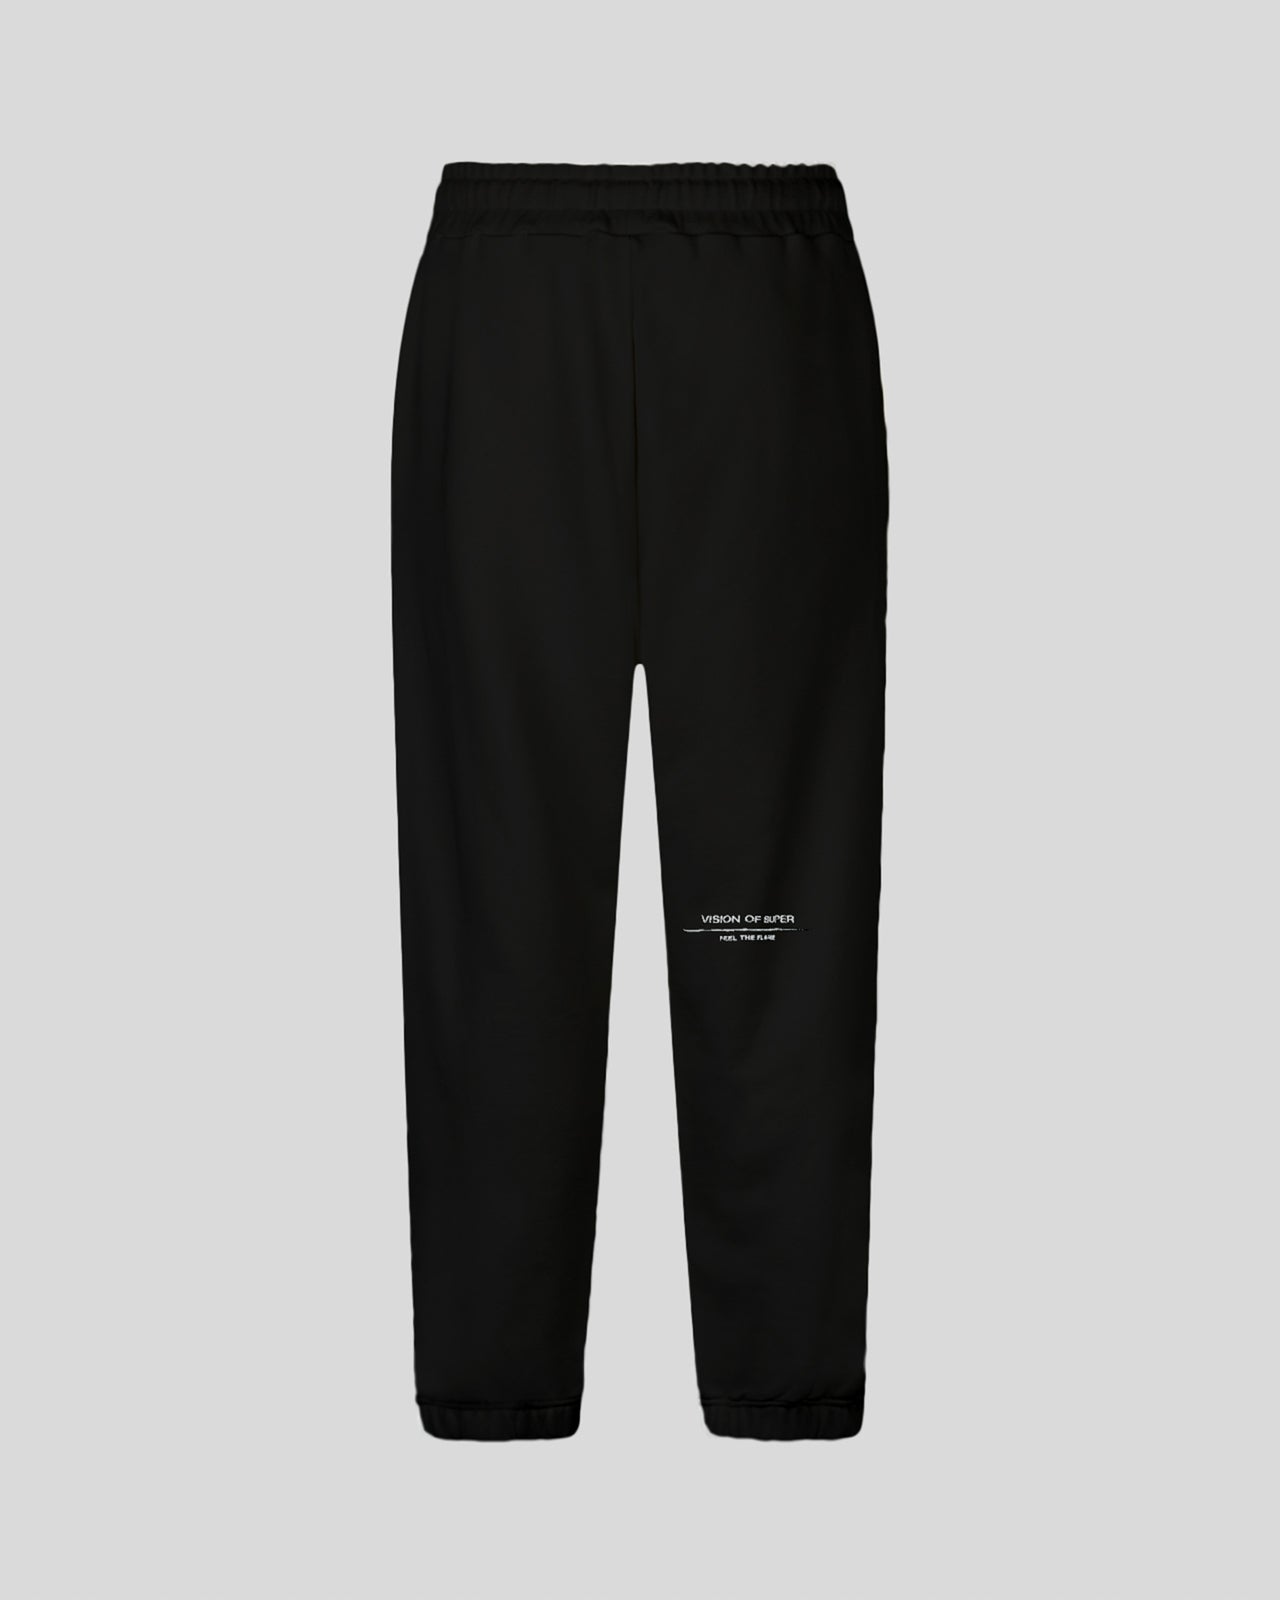 BLACK PANTS WITH FLAMES LOGO